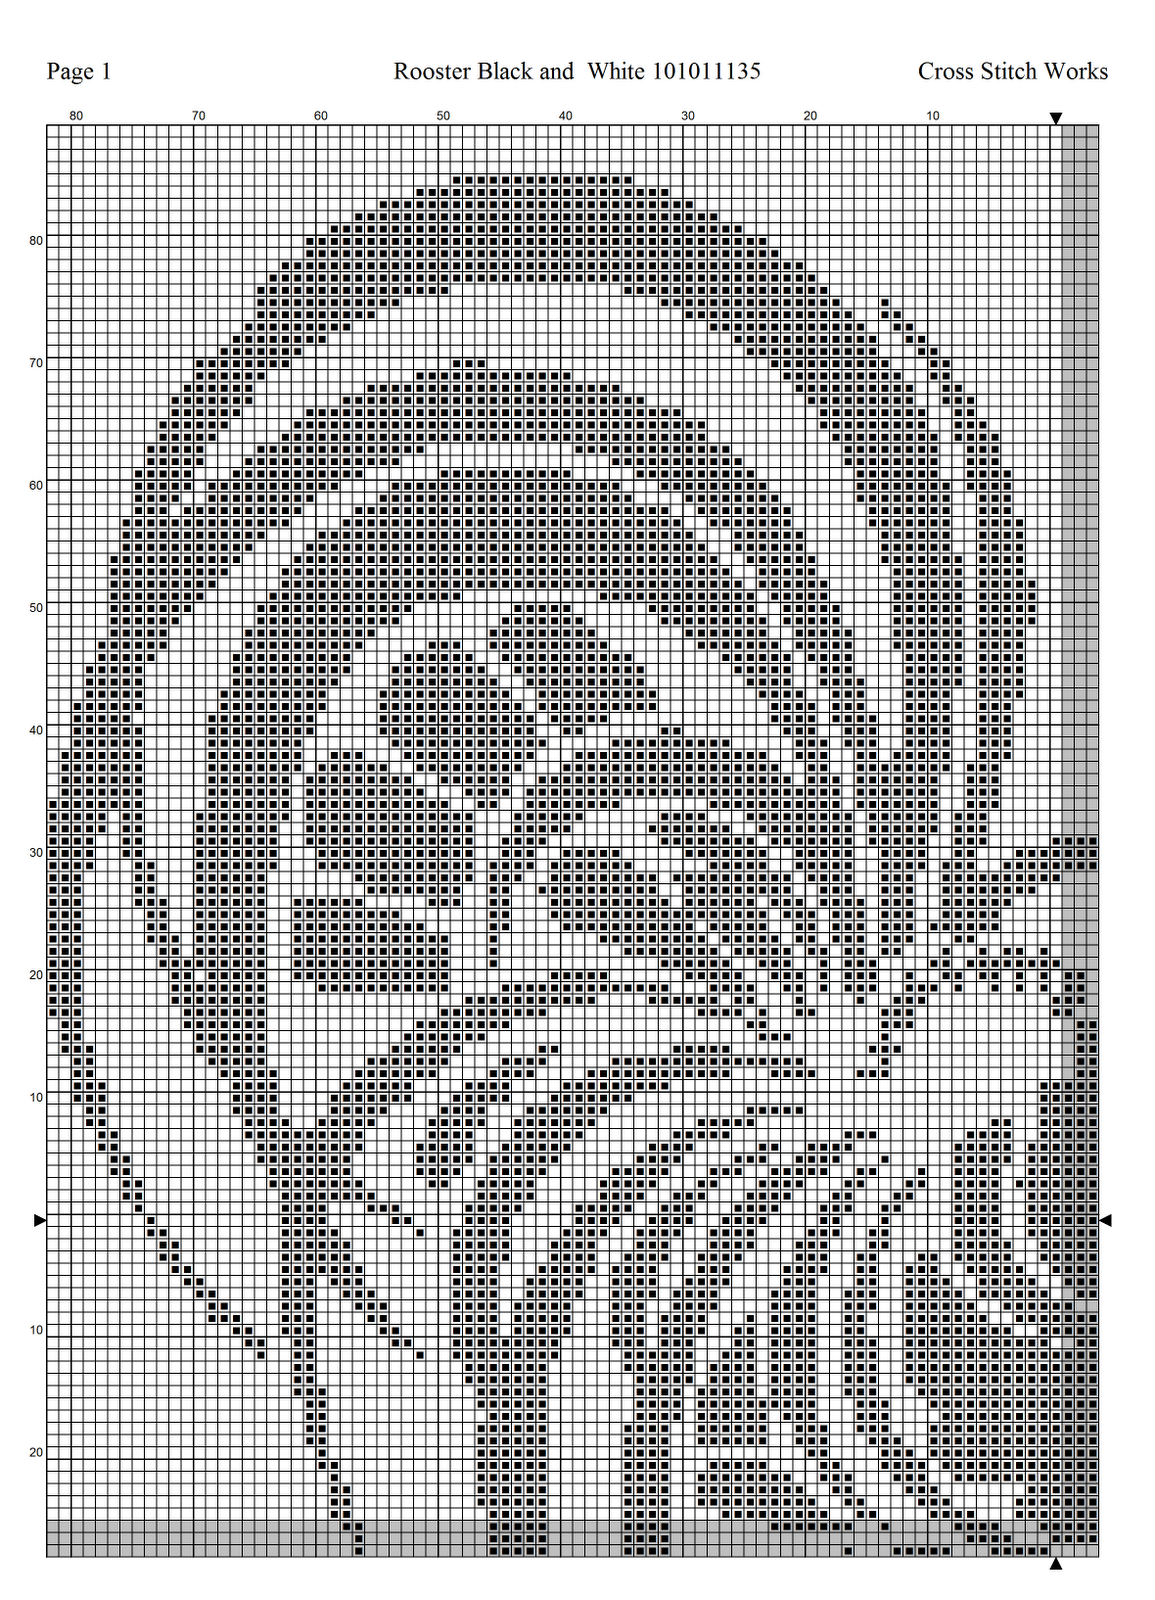 cross-stitch-works-rooster-black-and-white-101011135-free-cross-stitch